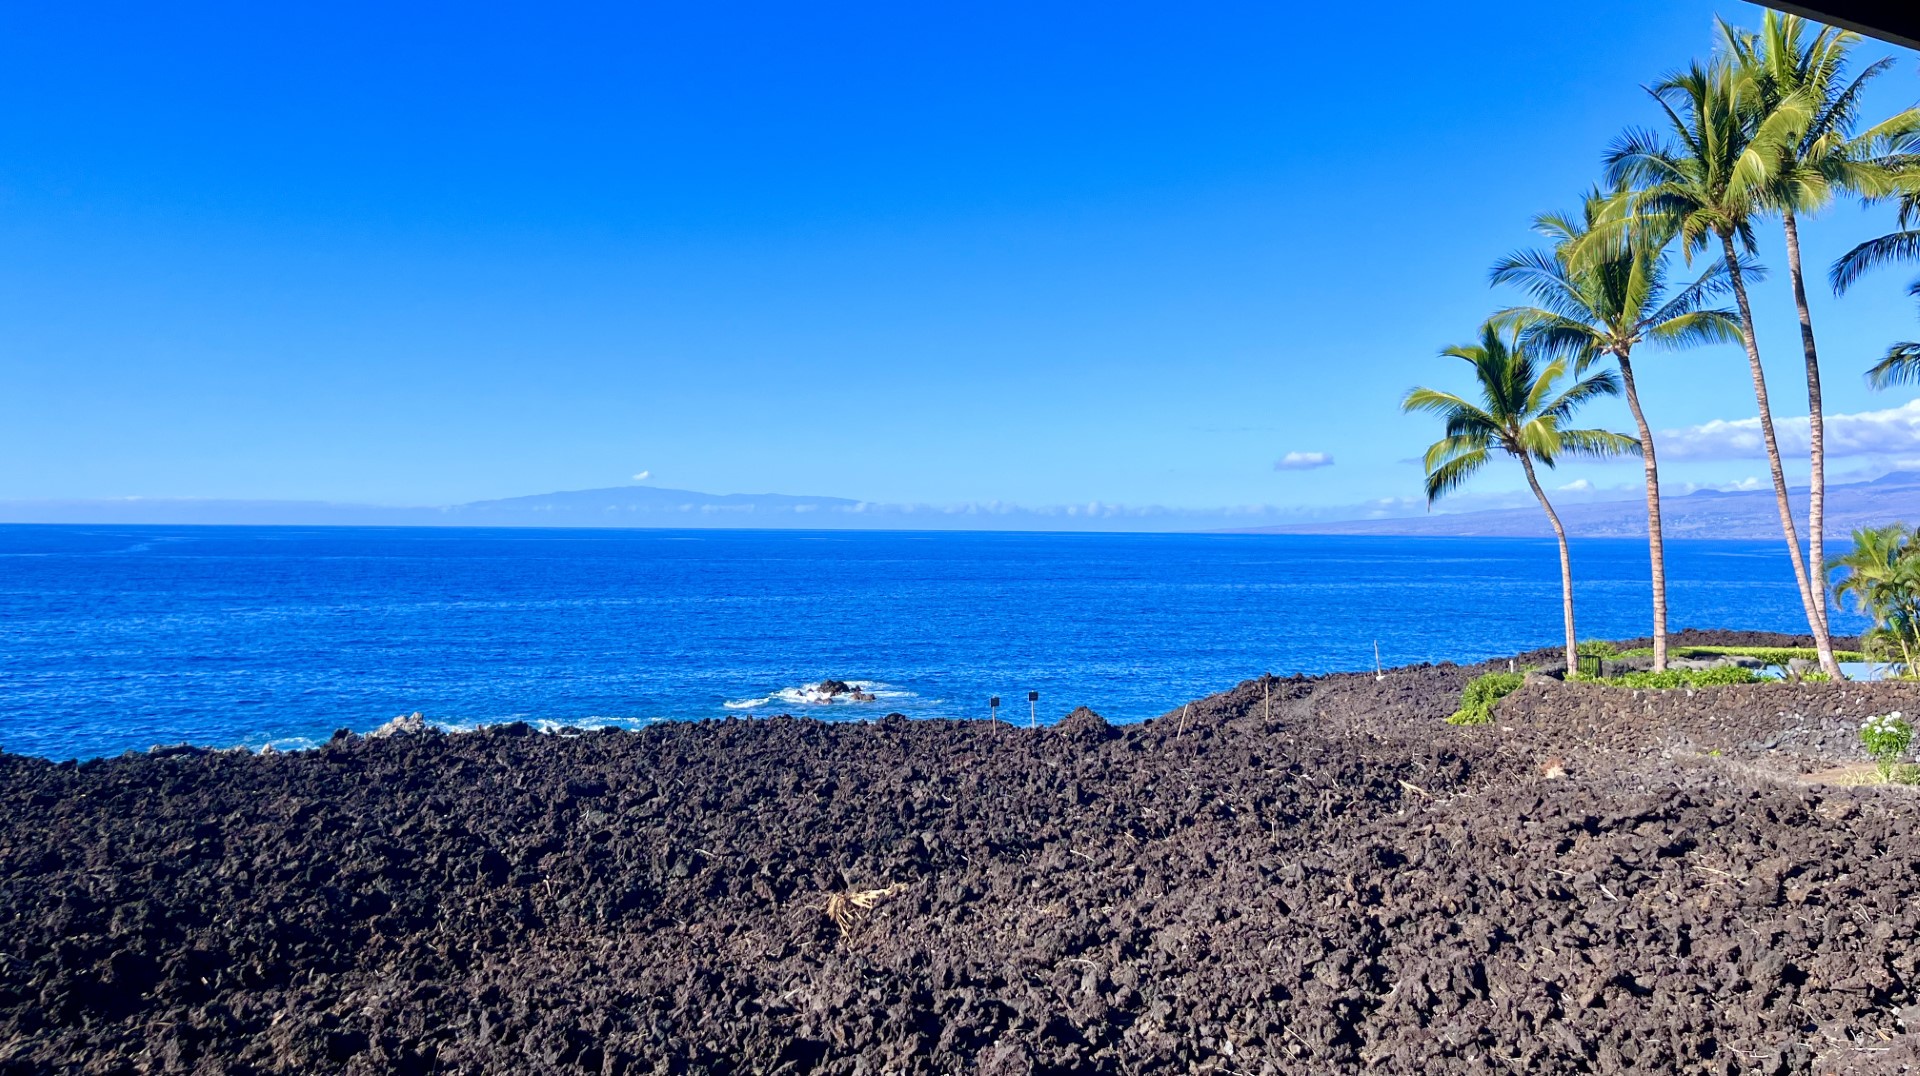 Breathtaking views of Maui on a clear day